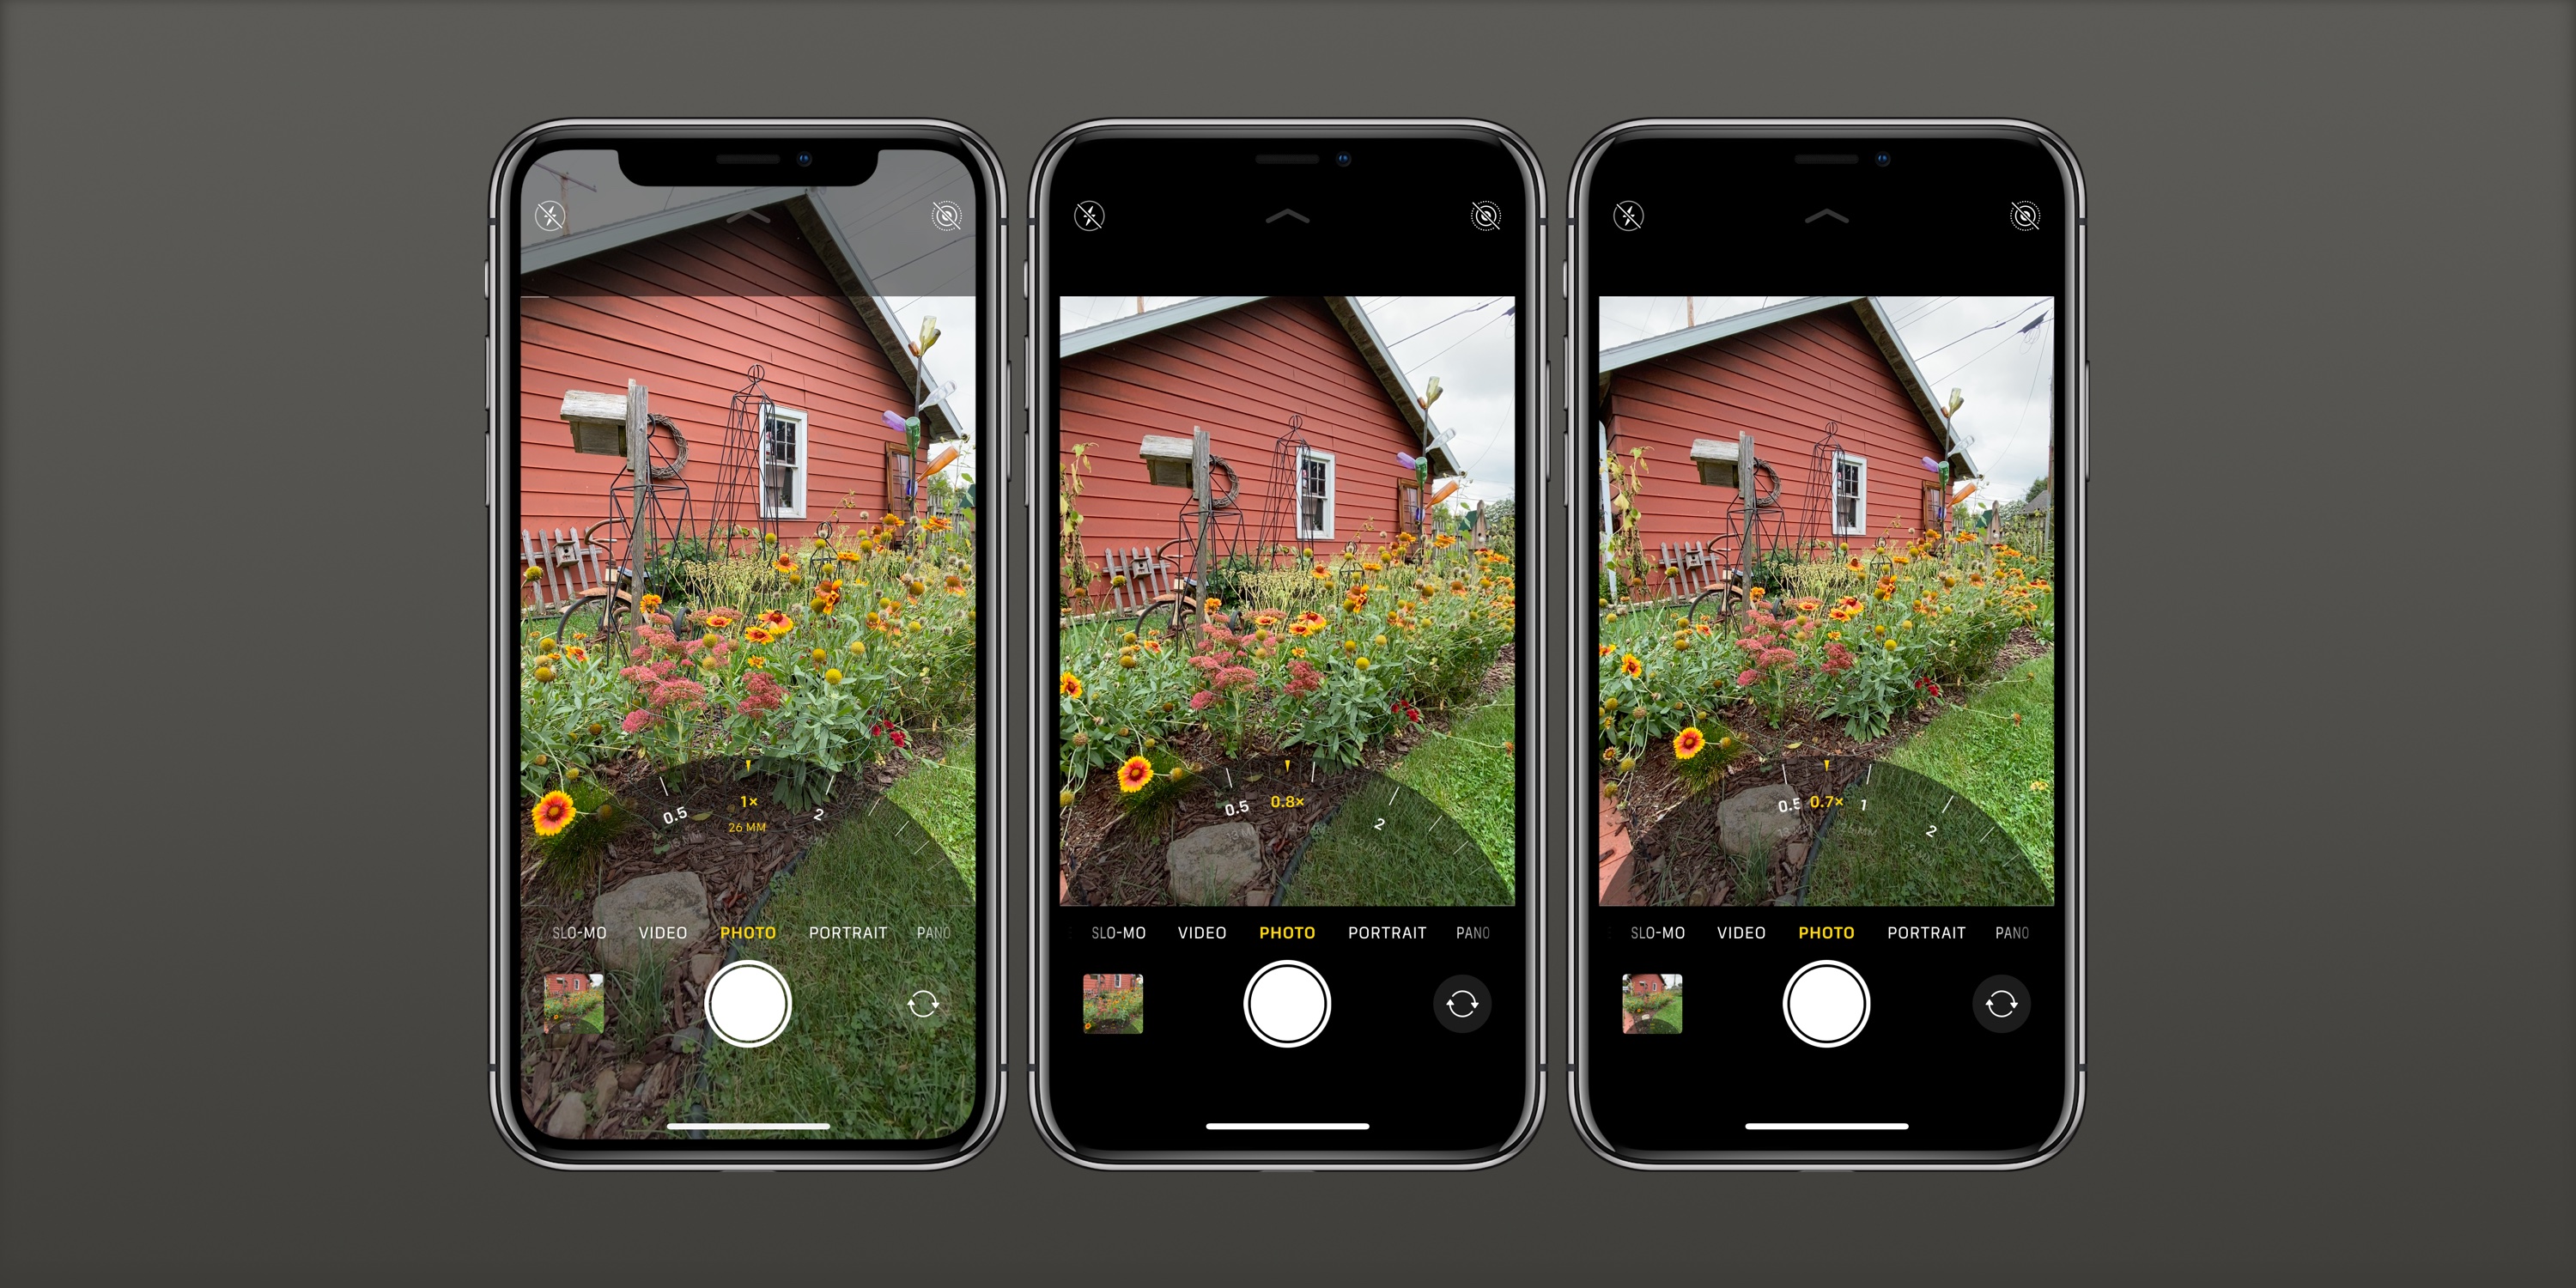 statisk Slette lække How to use the ultra wide camera on iPhone 11 and 12 - 9to5Mac